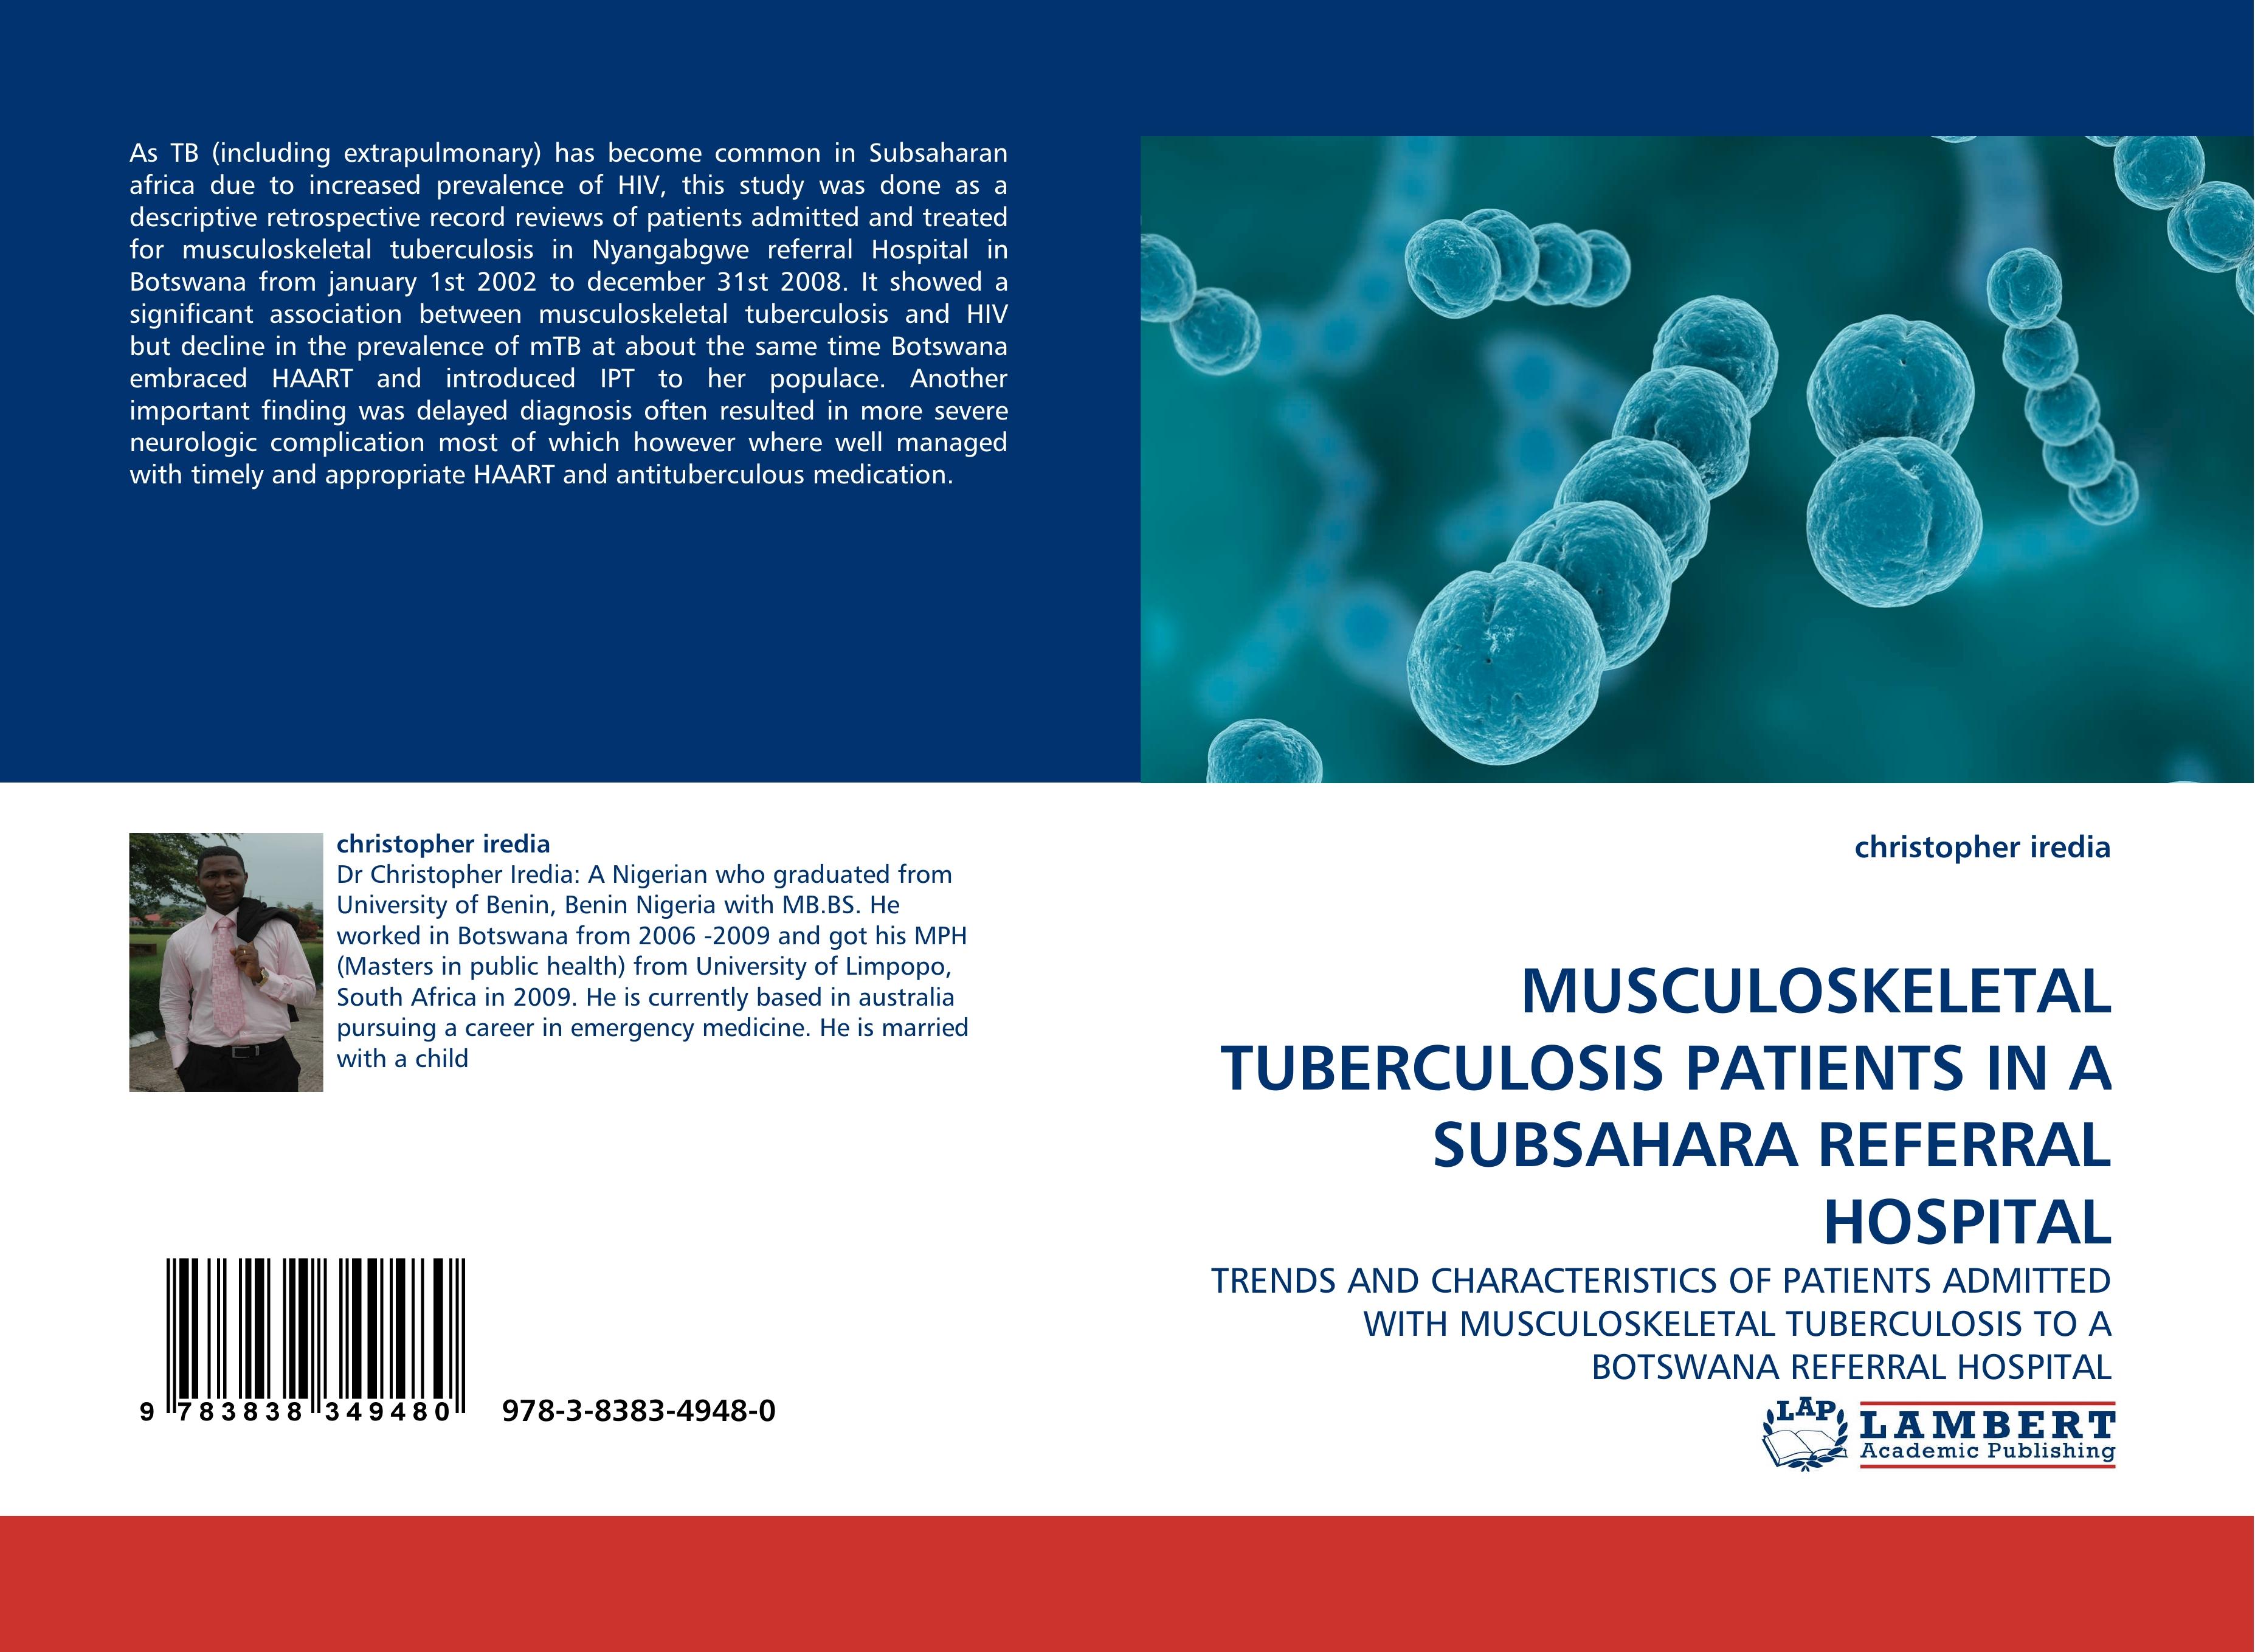 MUSCULOSKELETAL TUBERCULOSIS PATIENTS IN A SUBSAHARA REFERRAL HOSPITAL | TRENDS AND CHARACTERISTICS OF PATIENTS ADMITTED WITH MUSCULOSKELETAL TUBERCULOSIS TO A BOTSWANA REFERRAL HOSPITAL | Iredia - Iredia, Christopher